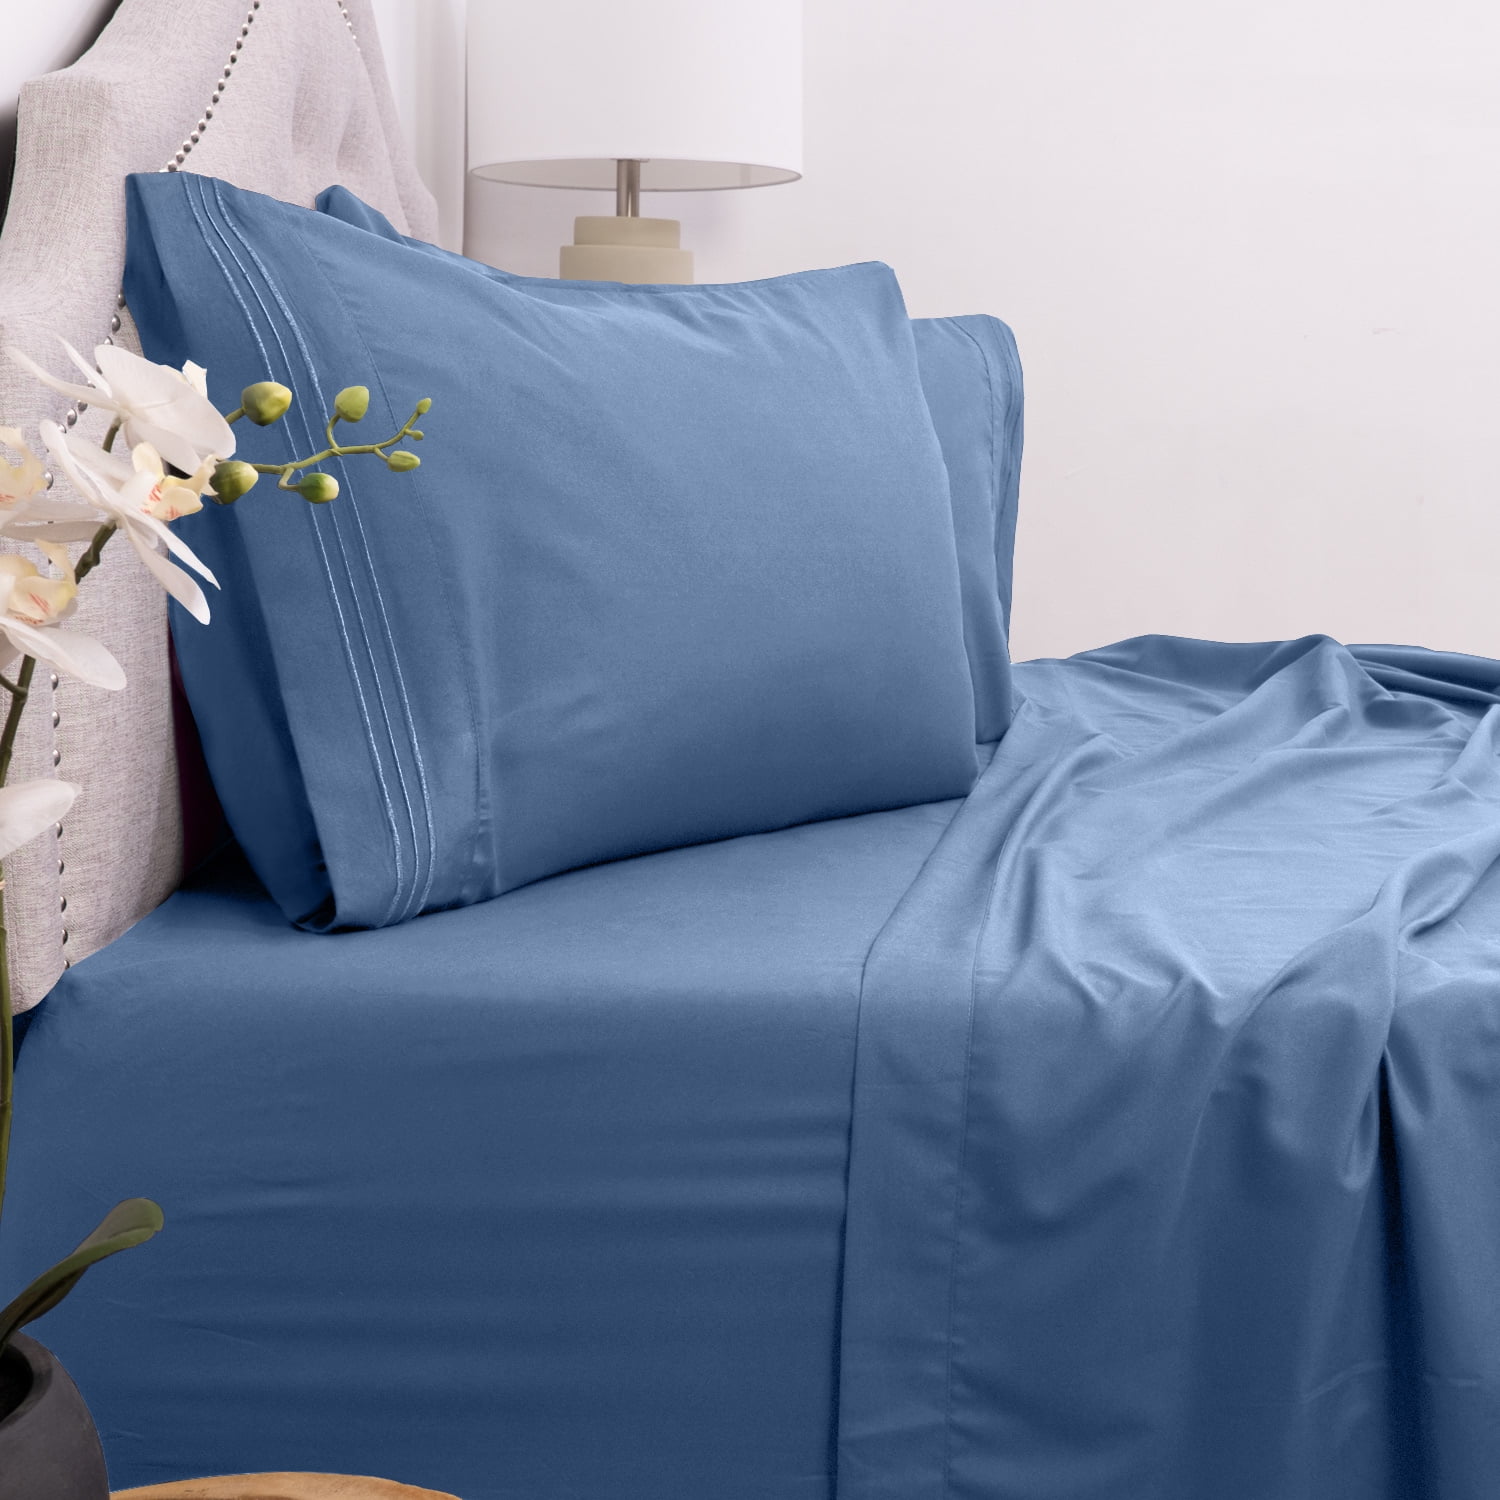 Details about   2 Pillowcases Egyptian Comfort 1800 Count Queen King Size Ultra Soft Pillowcases 